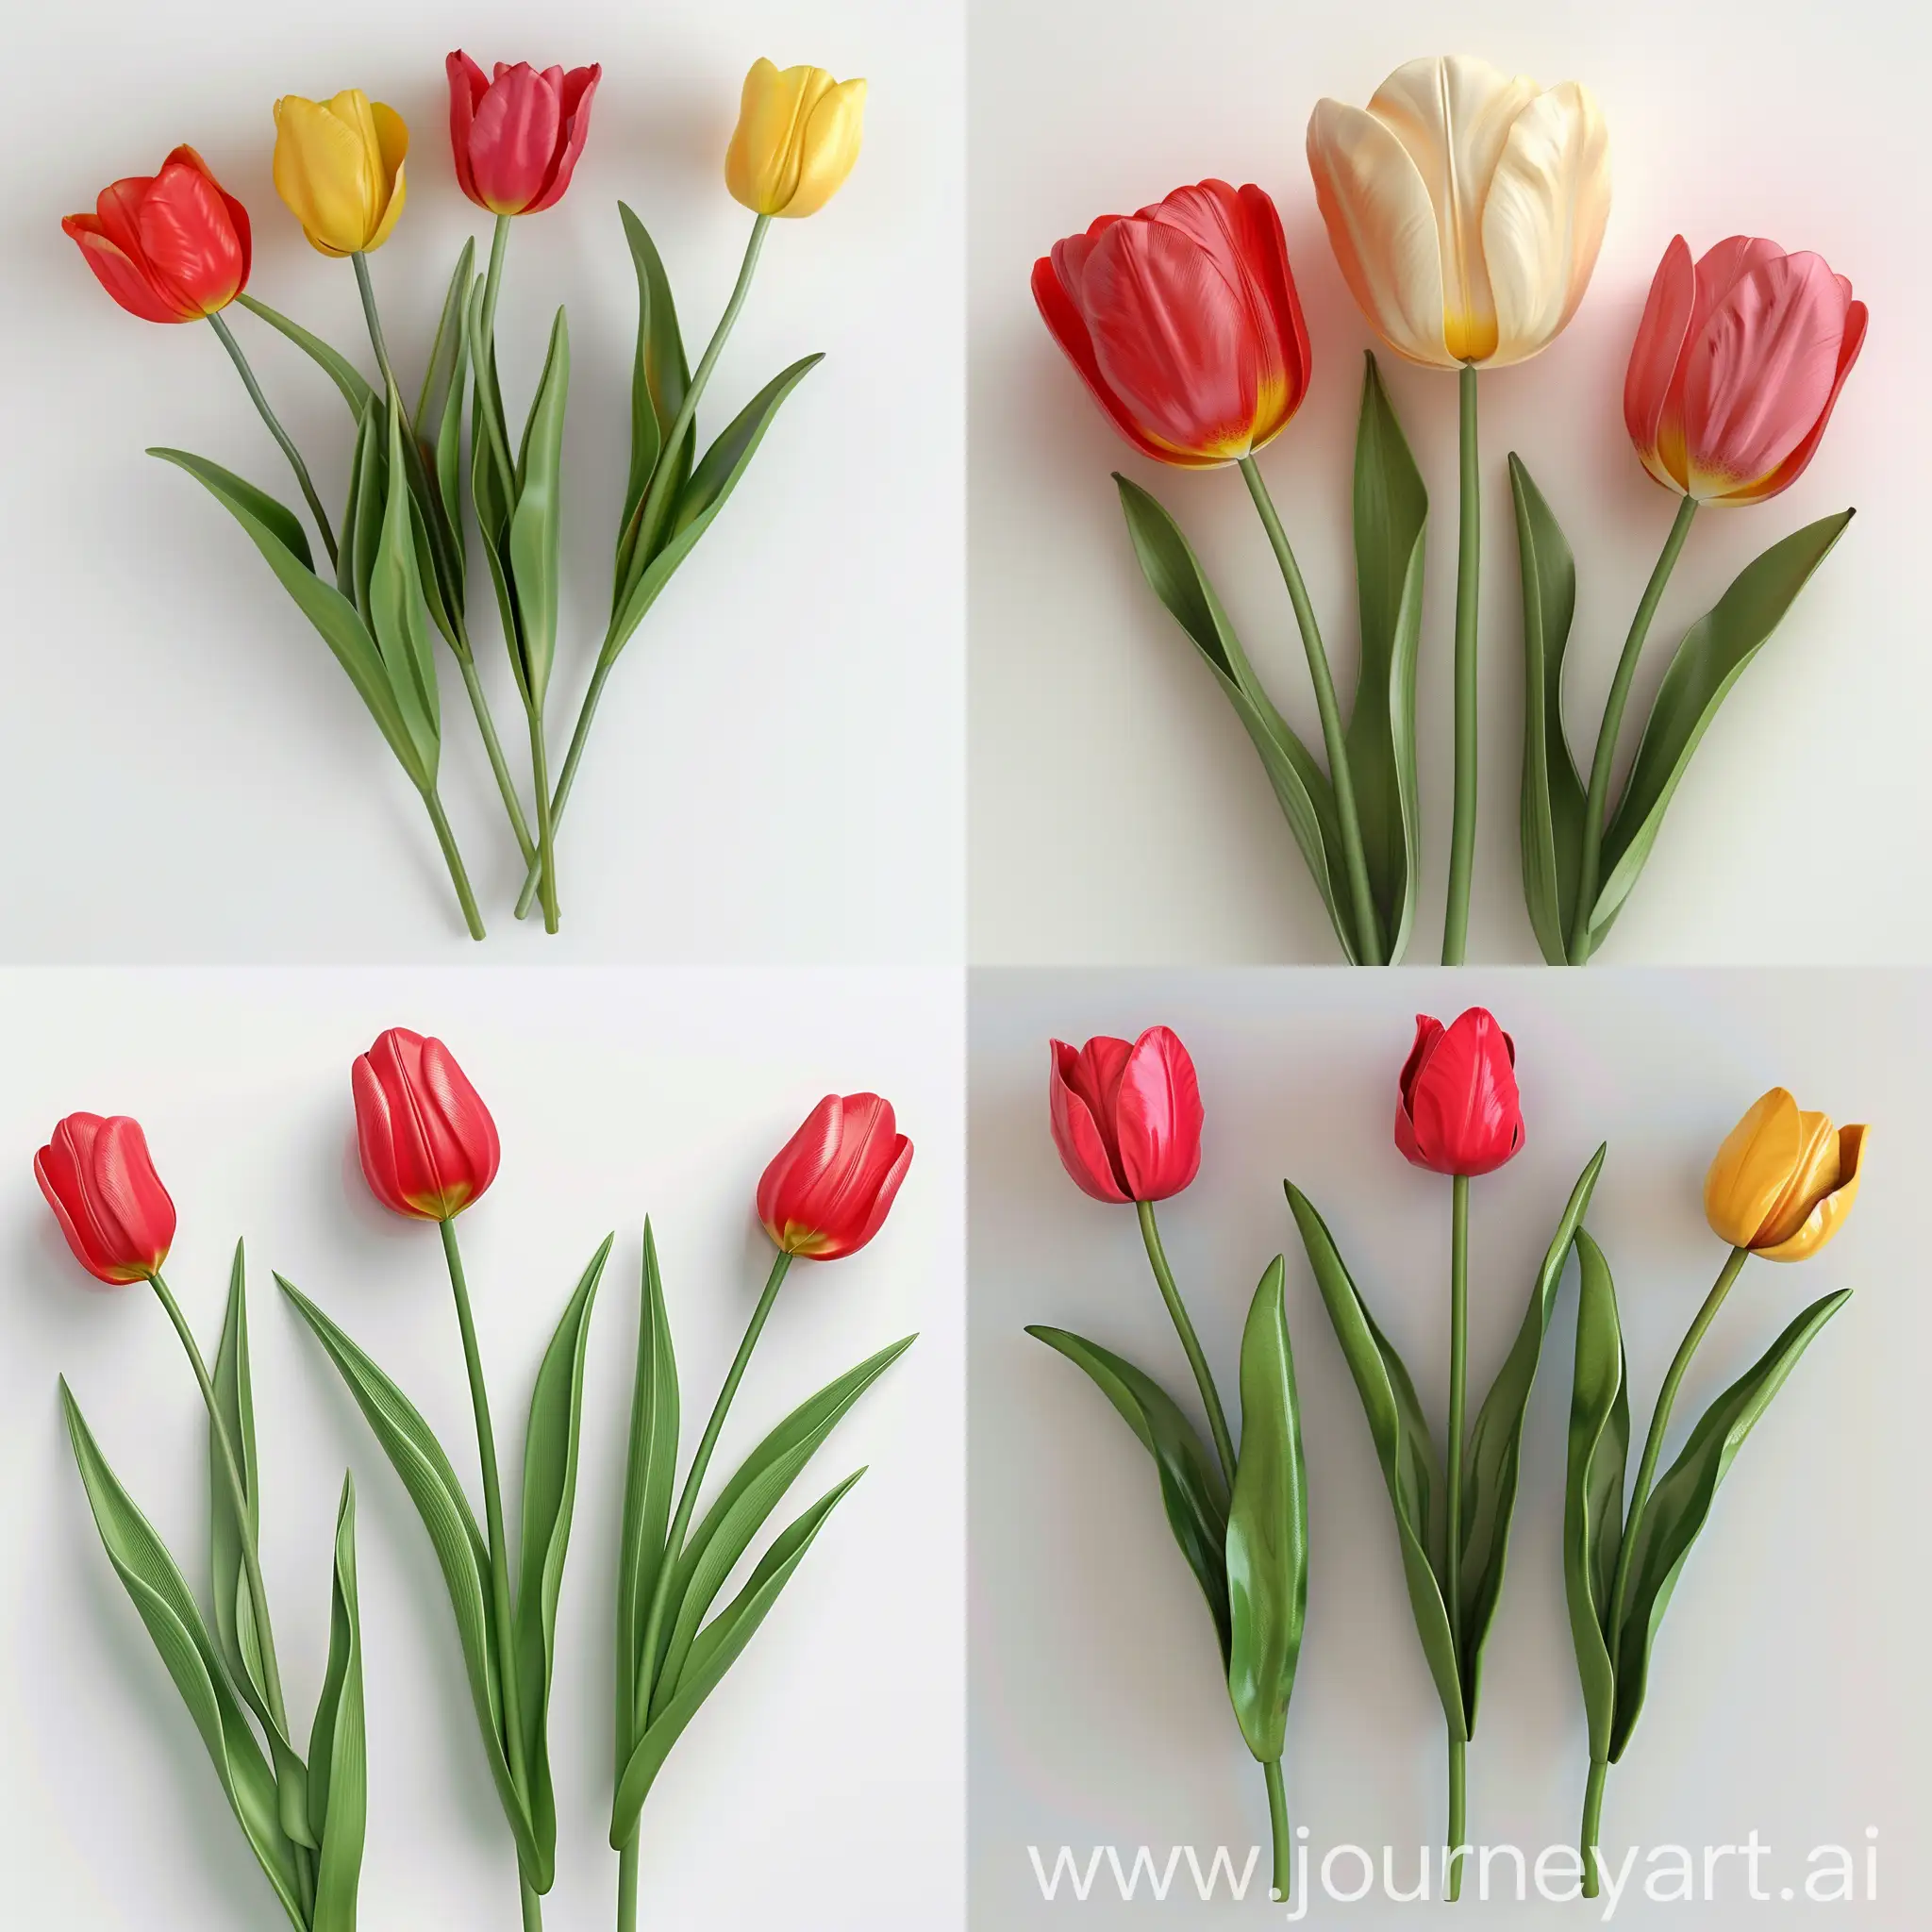 Vibrant-3D-Tulips-Blooming-on-a-Clean-White-Canvas